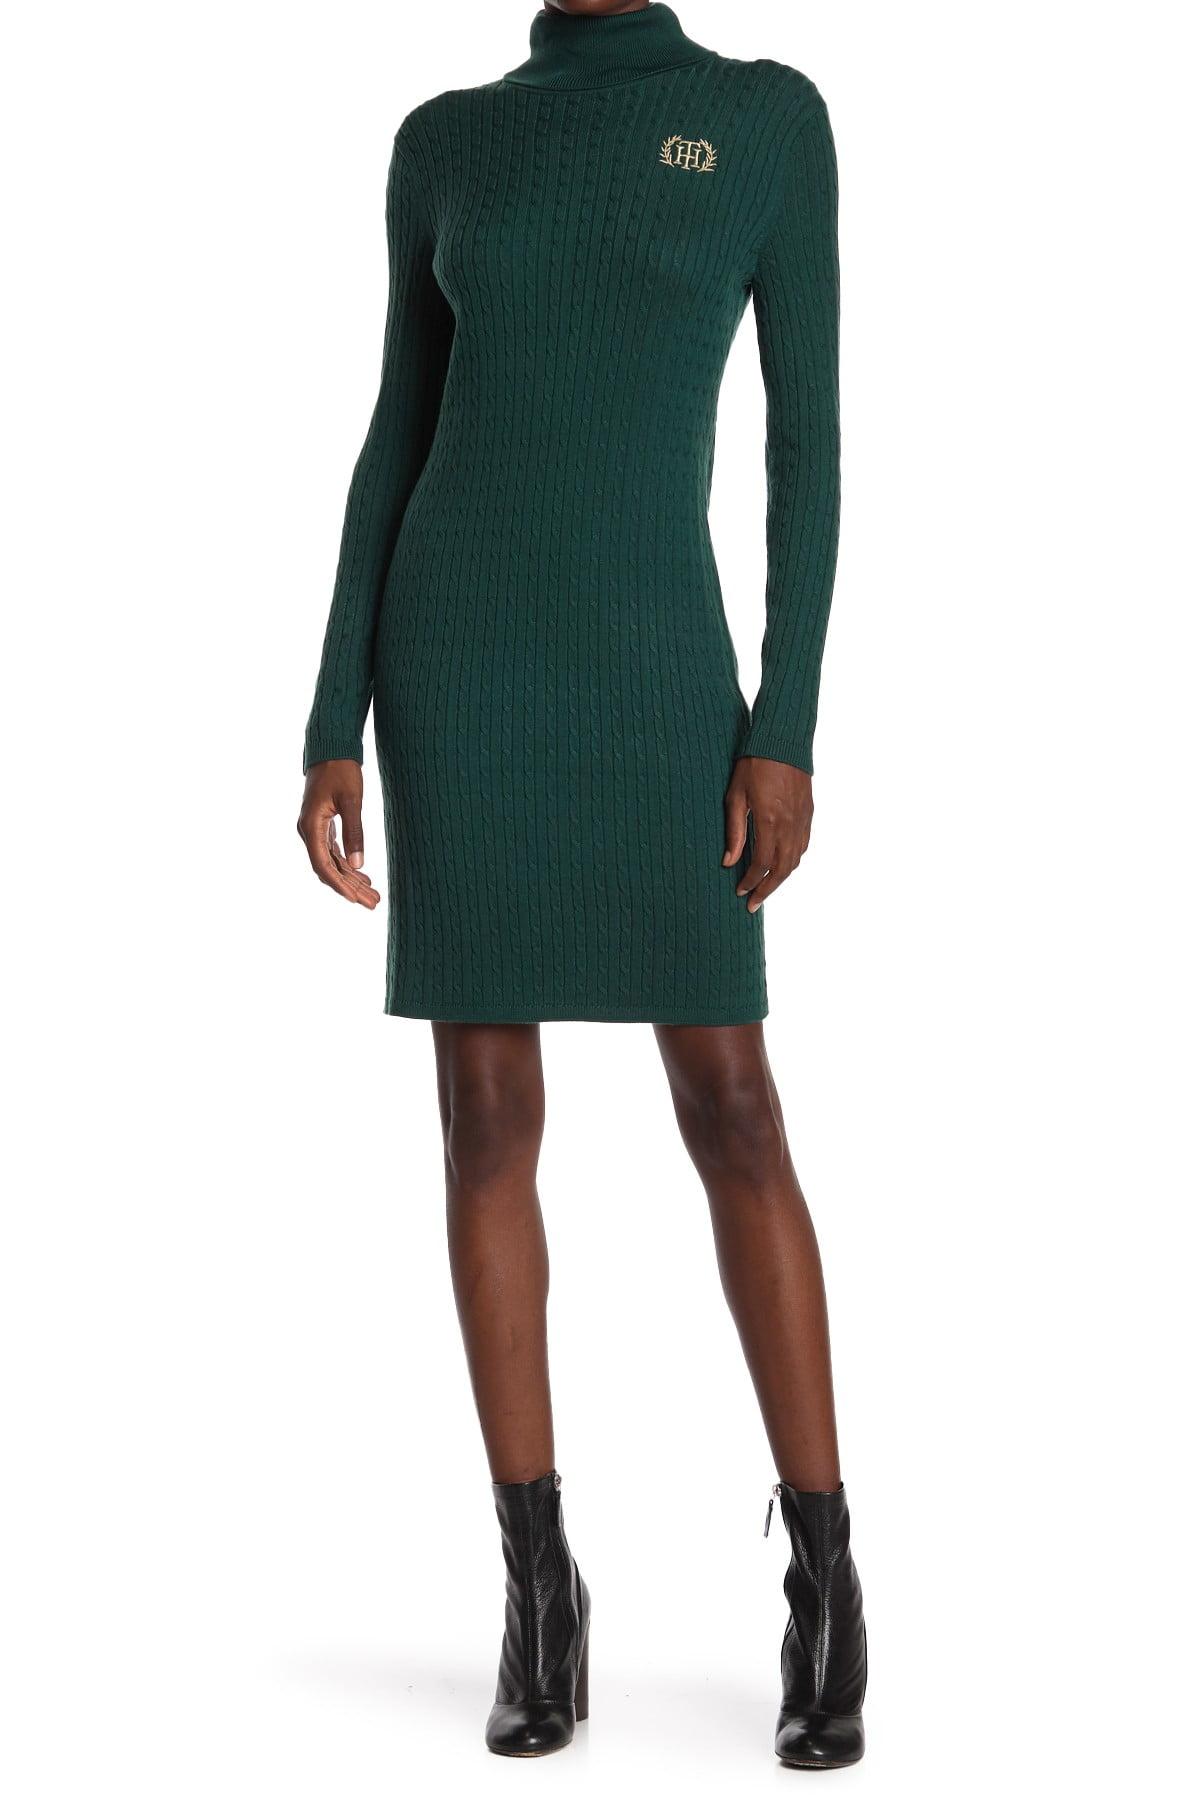 Tommy Hilfiger Turtleneck Crest Cable-knit Sweater Dress in Forest (Green) - Lyst